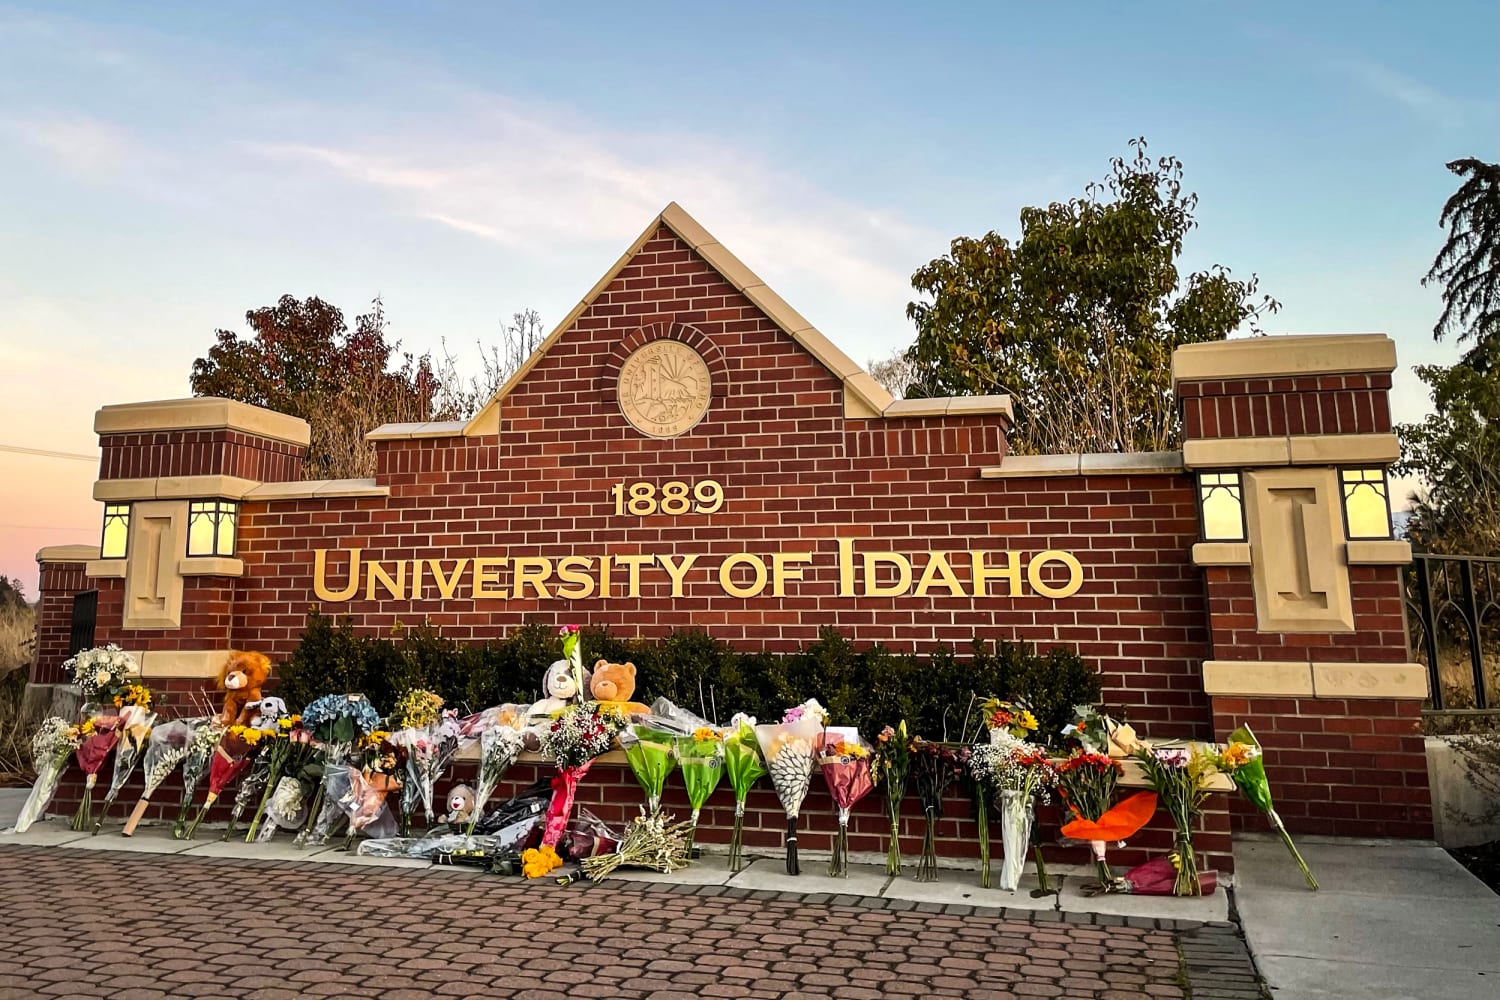 Idaho murders: 25 to 40% of students chose not to return to campus